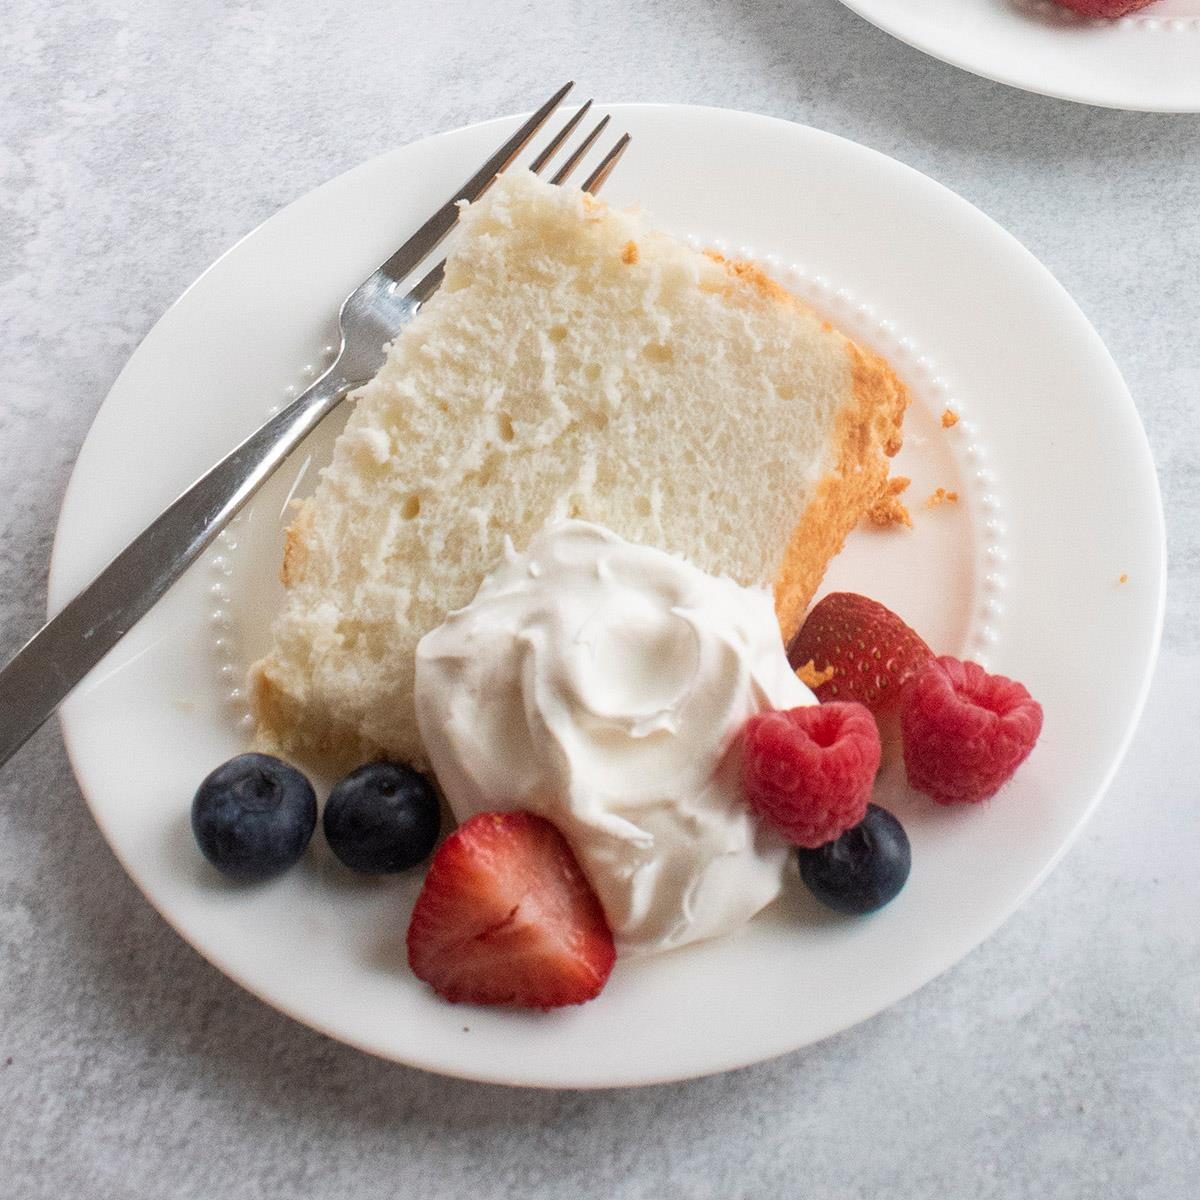 Best Angel Food Cake Recipe: How to Make It